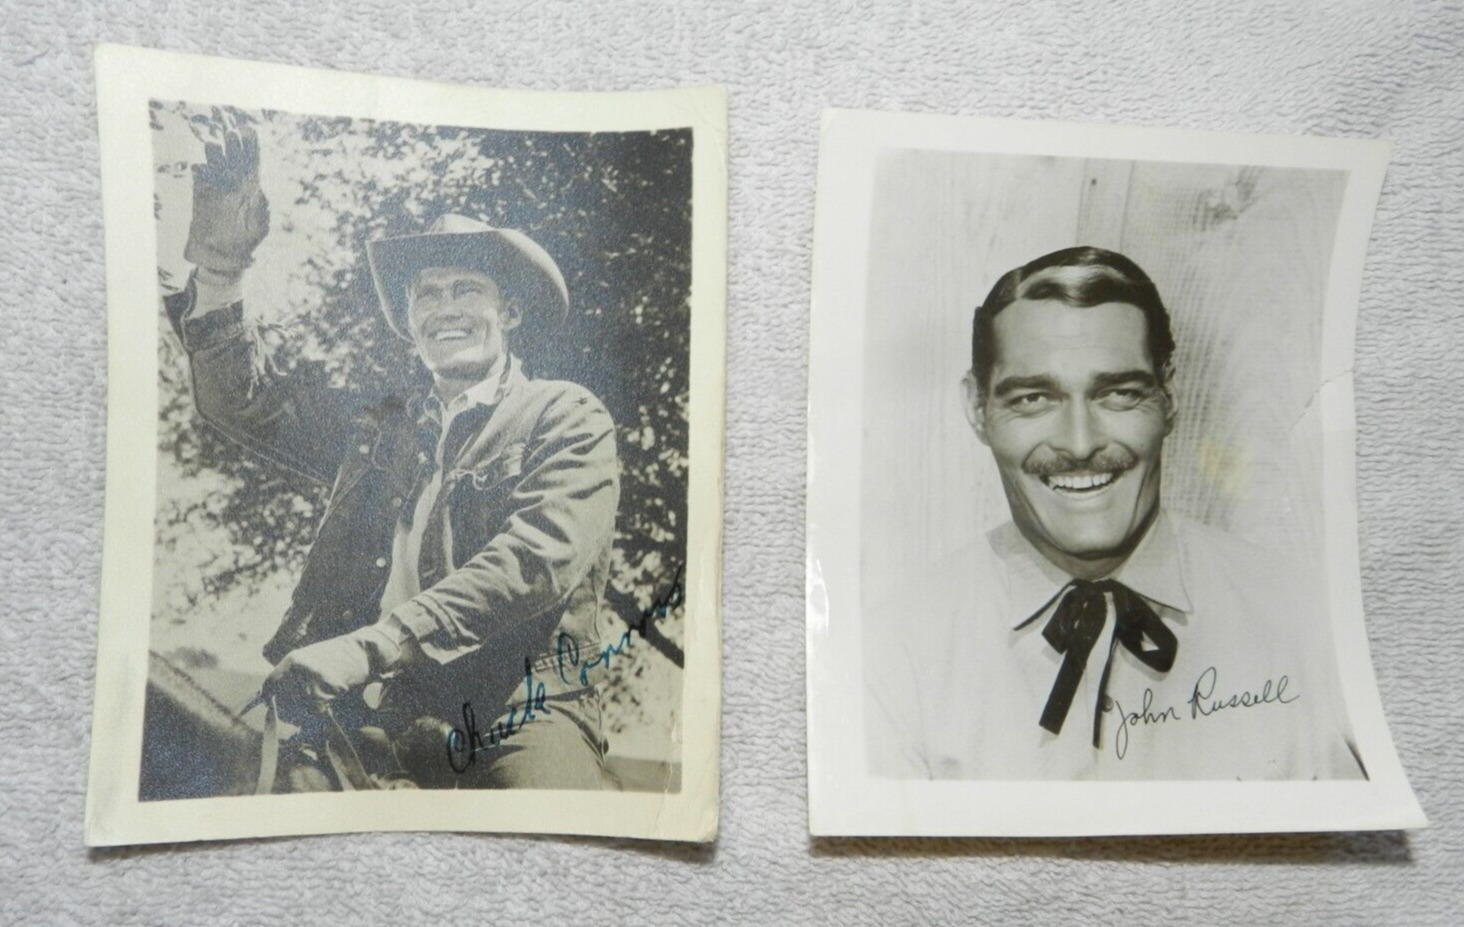 John Russell & Chuck Conners -Signed Vintage Photographs